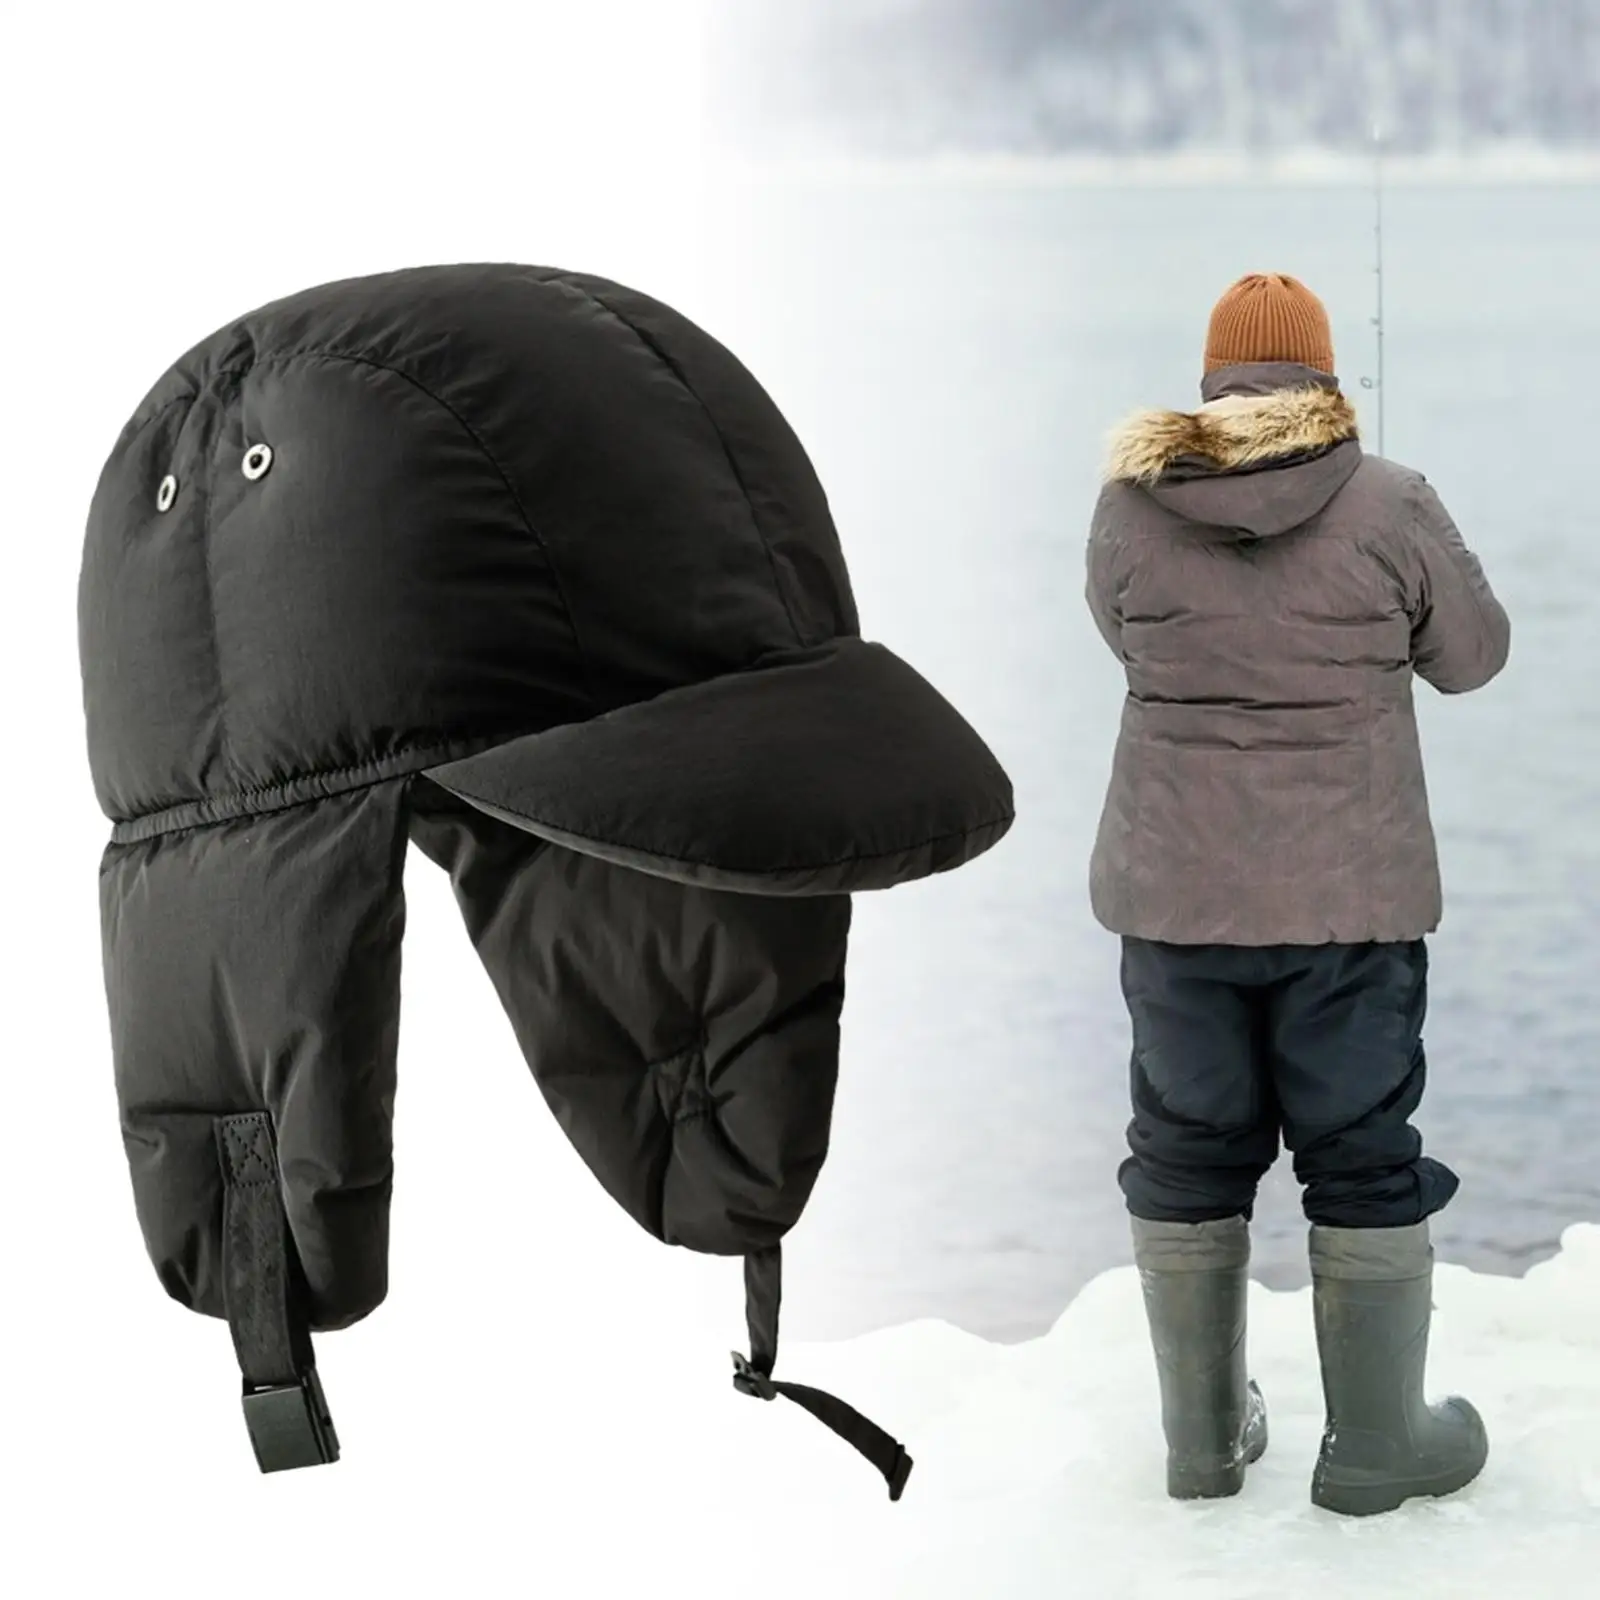 Hat with Earflaps Warm Hat with Peak for Men Women Peaked Hat Baseball Cap Winter Hat Filled Hat for Snow Sports Hiking